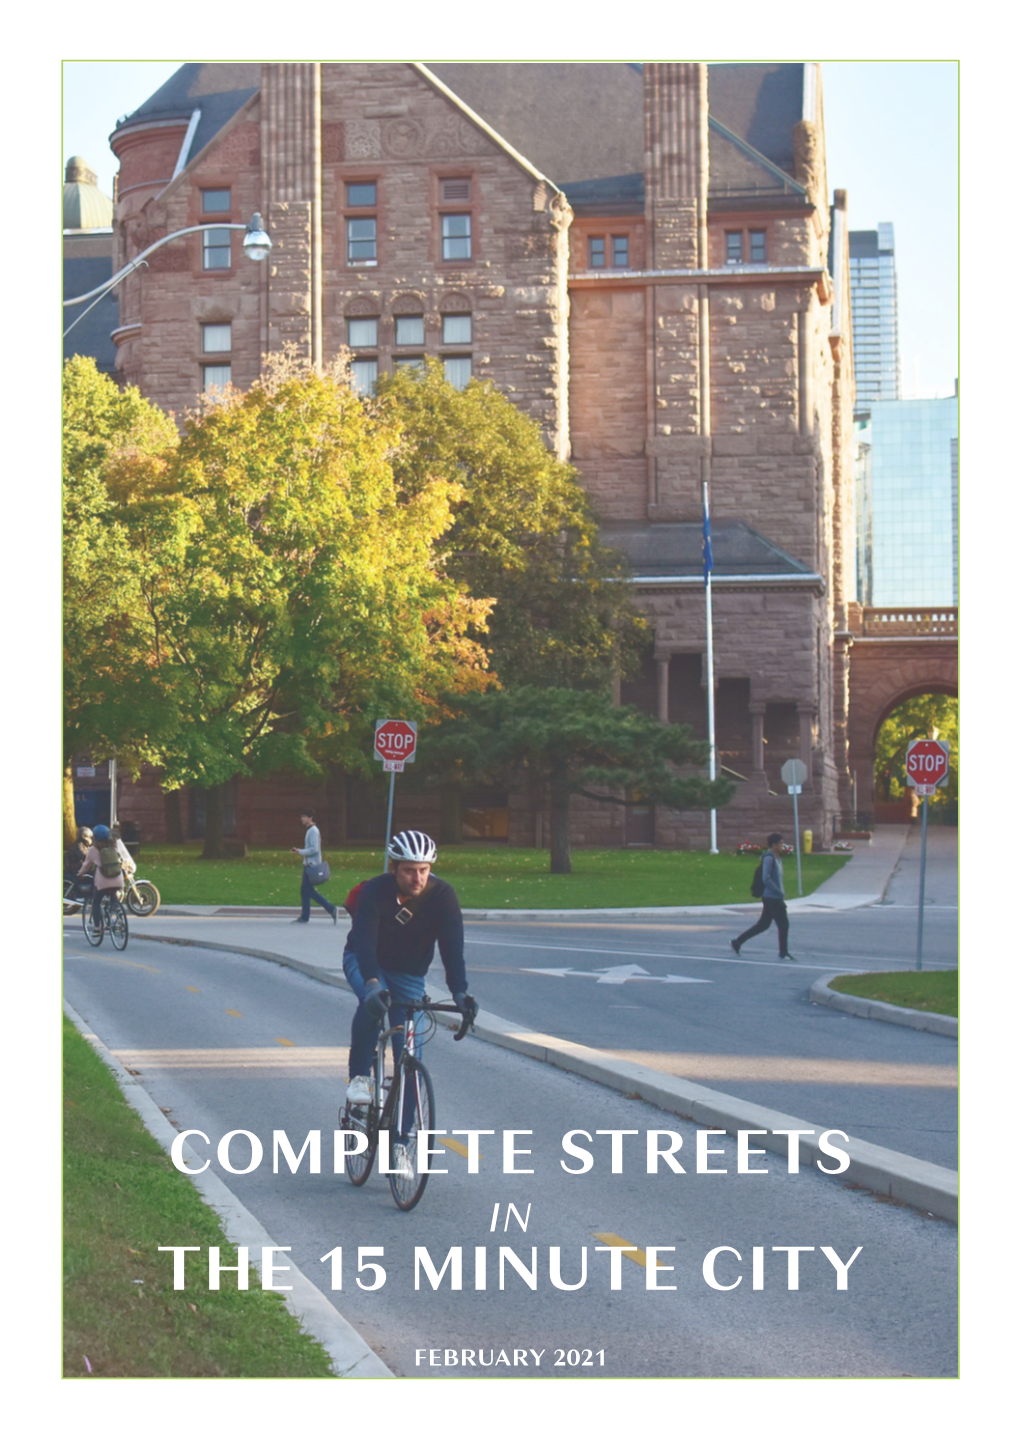 Complete Streets the 15 Minute City